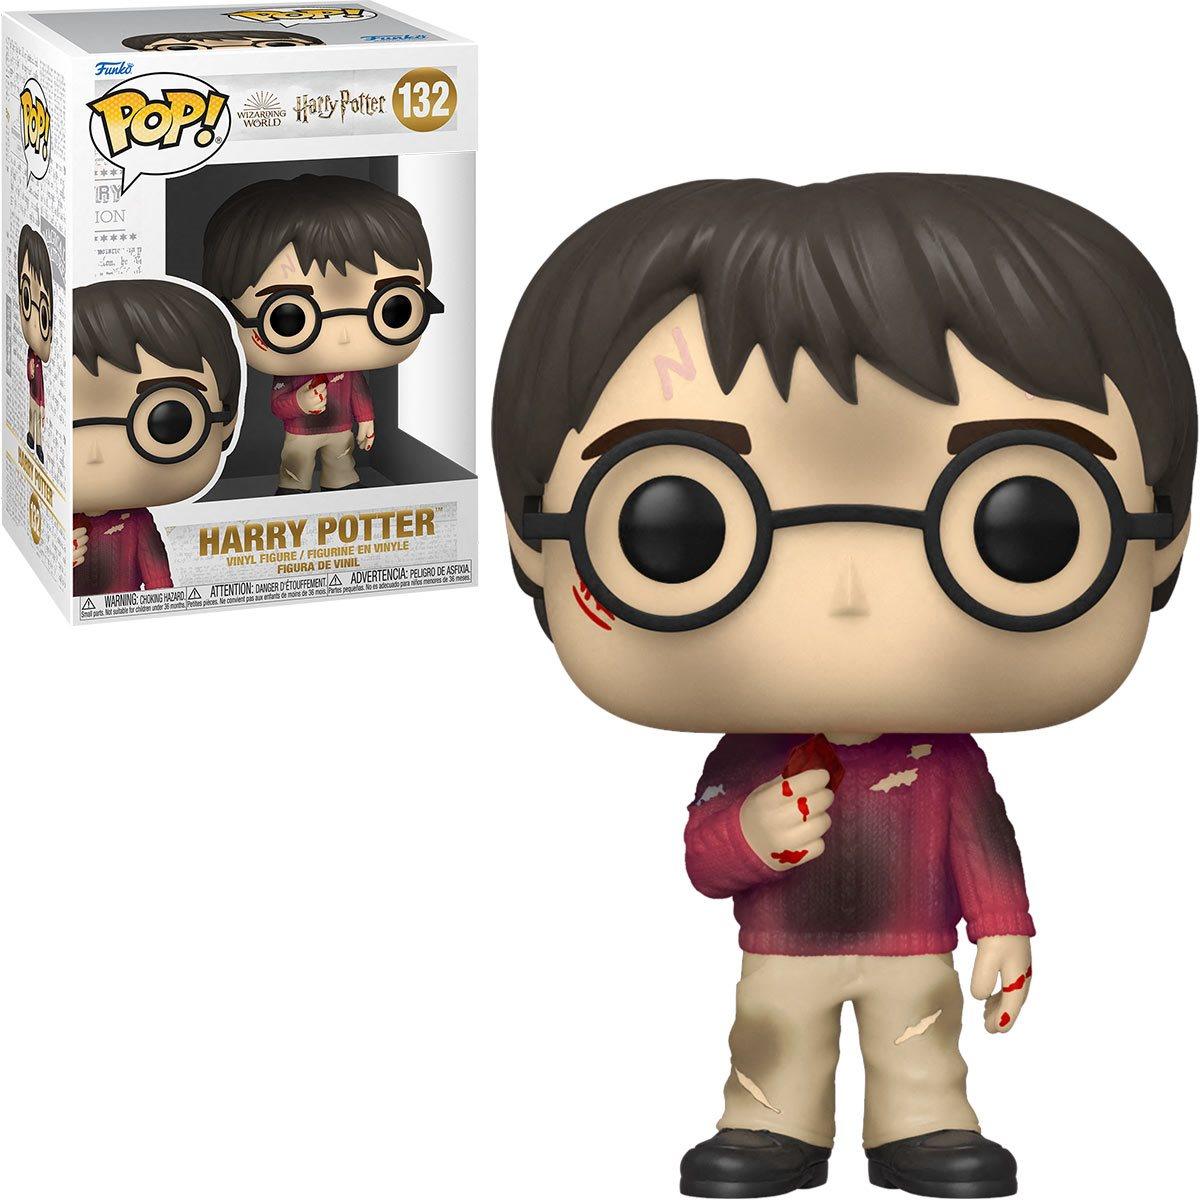 Harry Potter: Funko Pop! - Harry Potter with the stone #132 - Magic Dreams Store